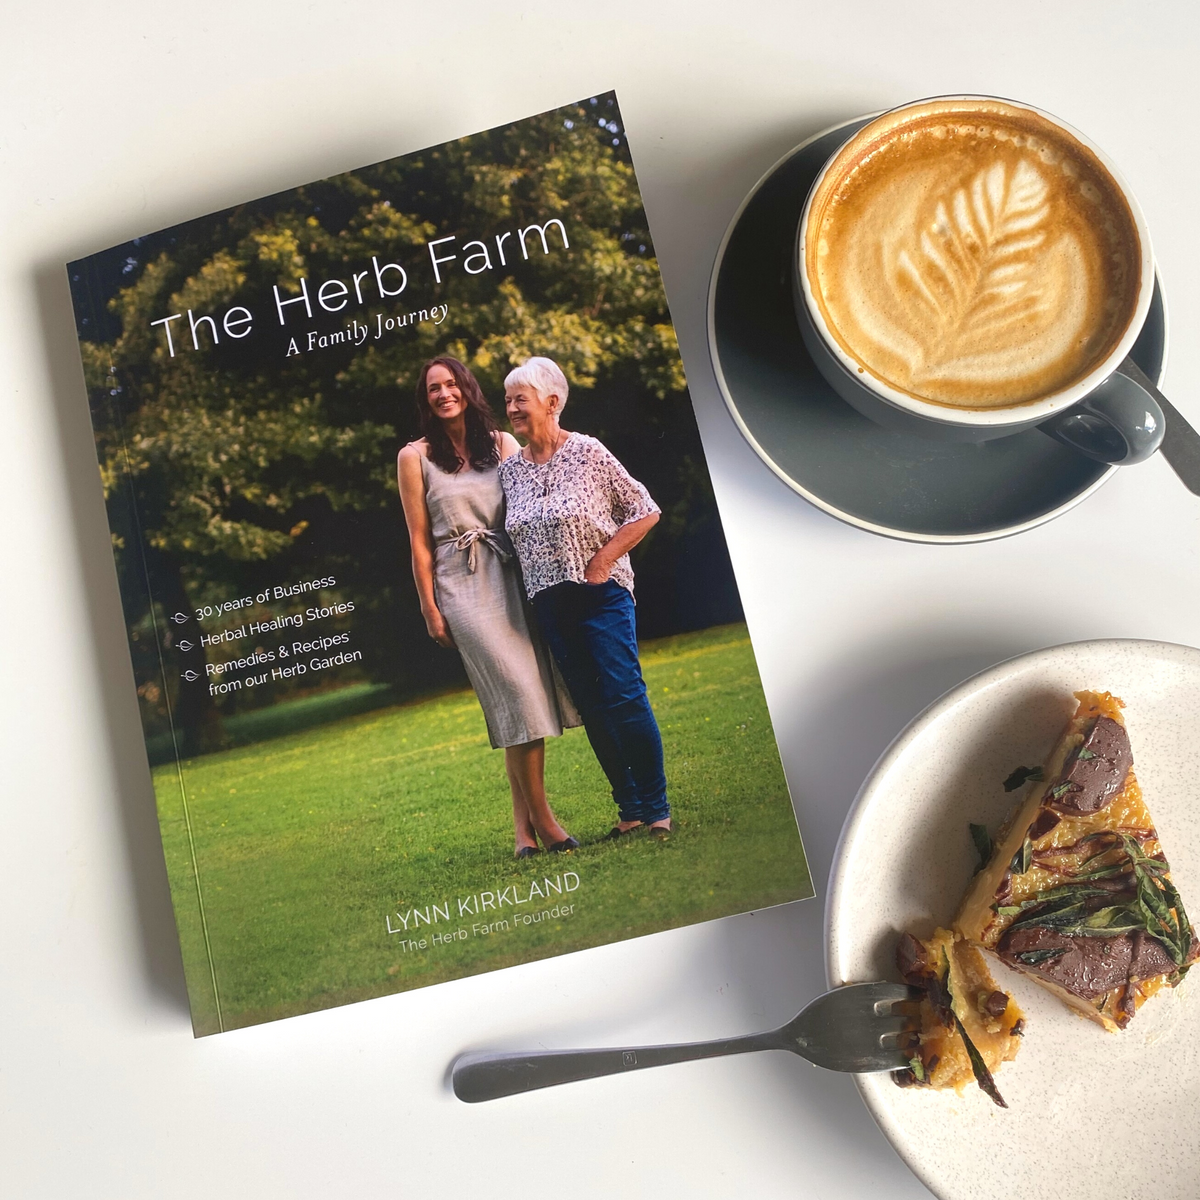 The Herb Farm Book - A Family Journey secondary